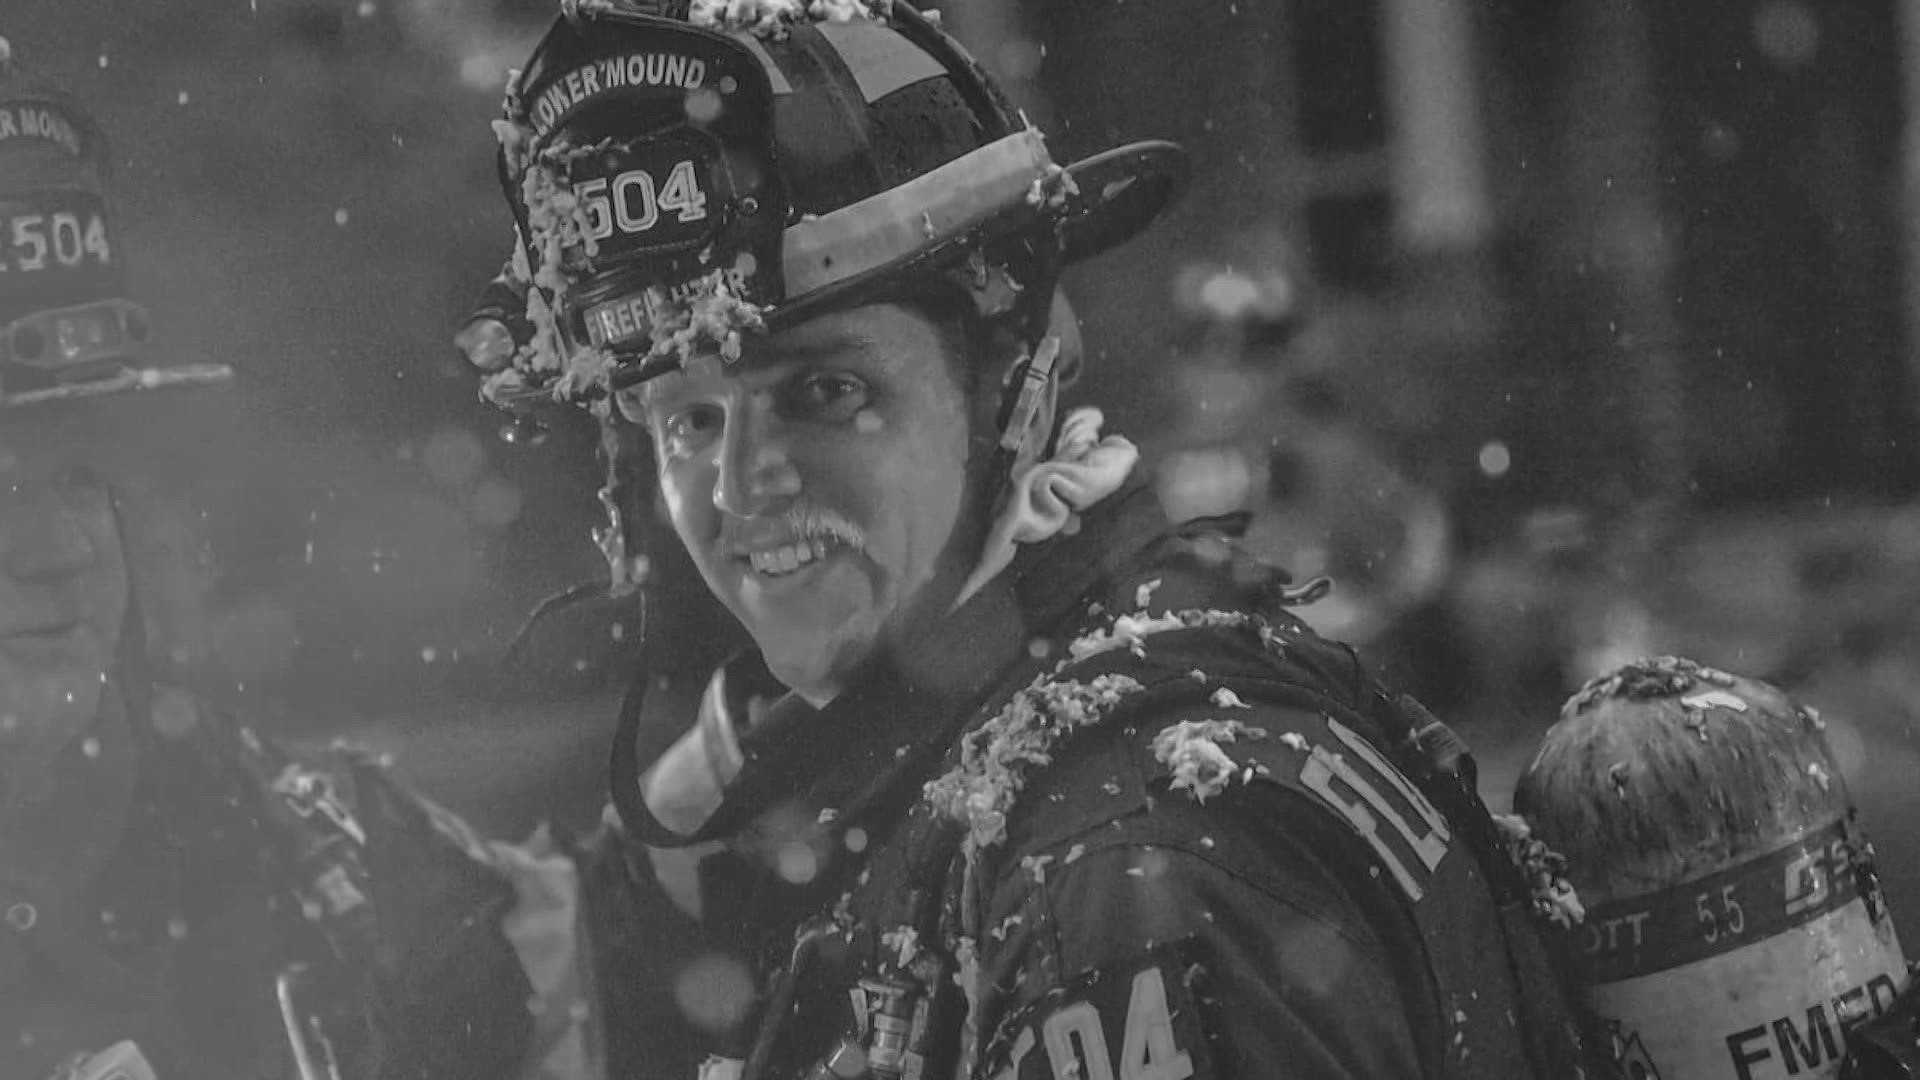 He was only 33 years old when he died of occupational cancer after about six years as a firefighter.